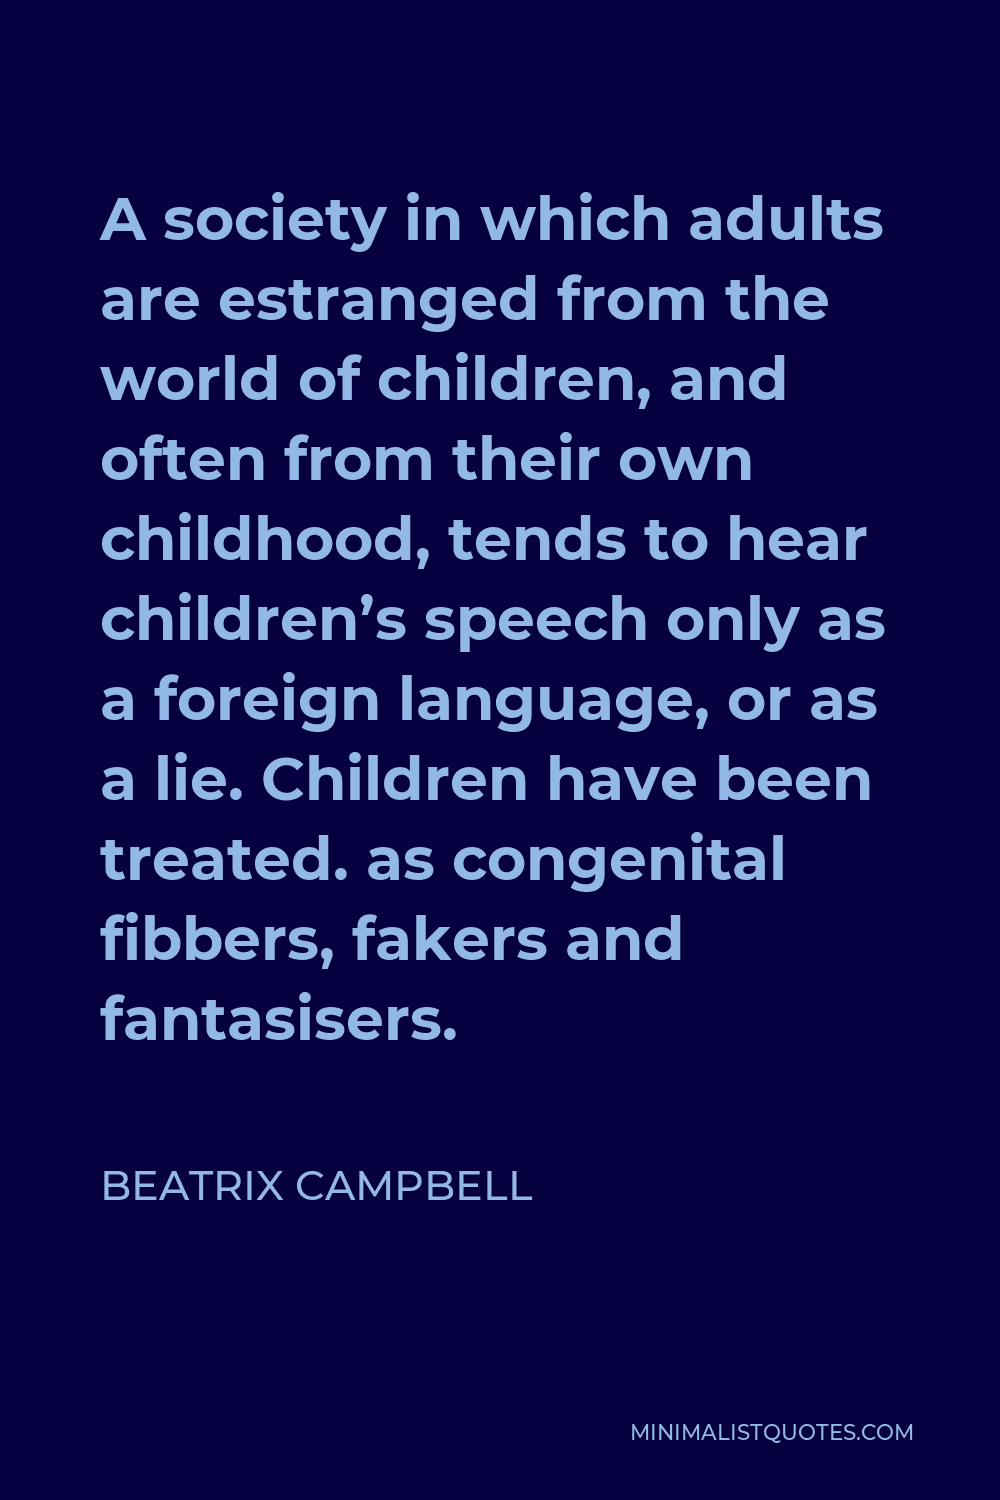 Beatrix Campbell Quote - A society in which adults are estranged from the world of children, and often from their own childhood, tends to hear children’s speech only as a foreign language, or as a lie. Children have been treated. as congenital fibbers, fakers and fantasisers.